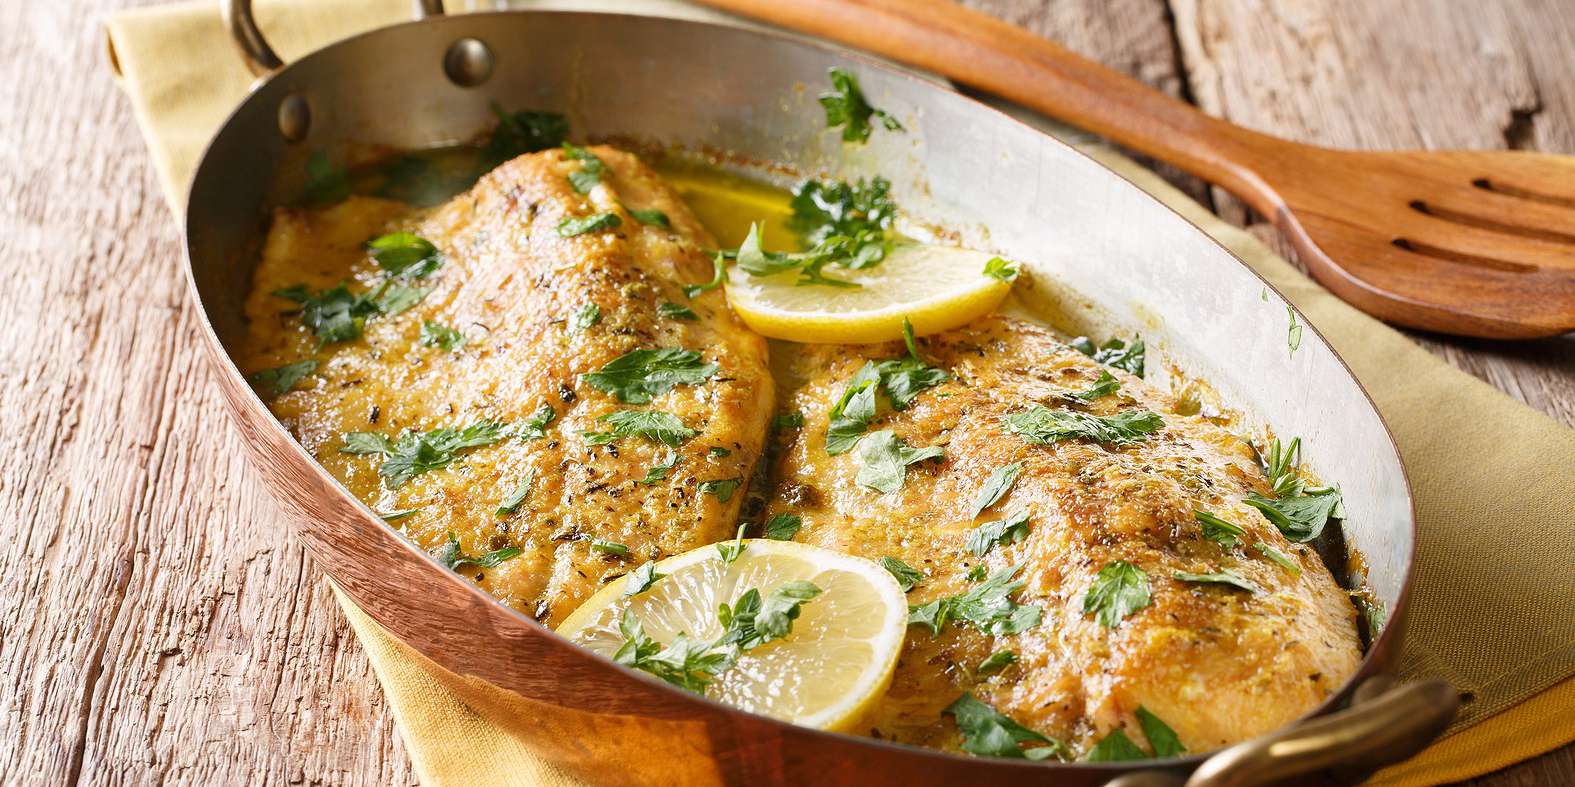 Trout with Garlic Lemon Butter Herb Sauce